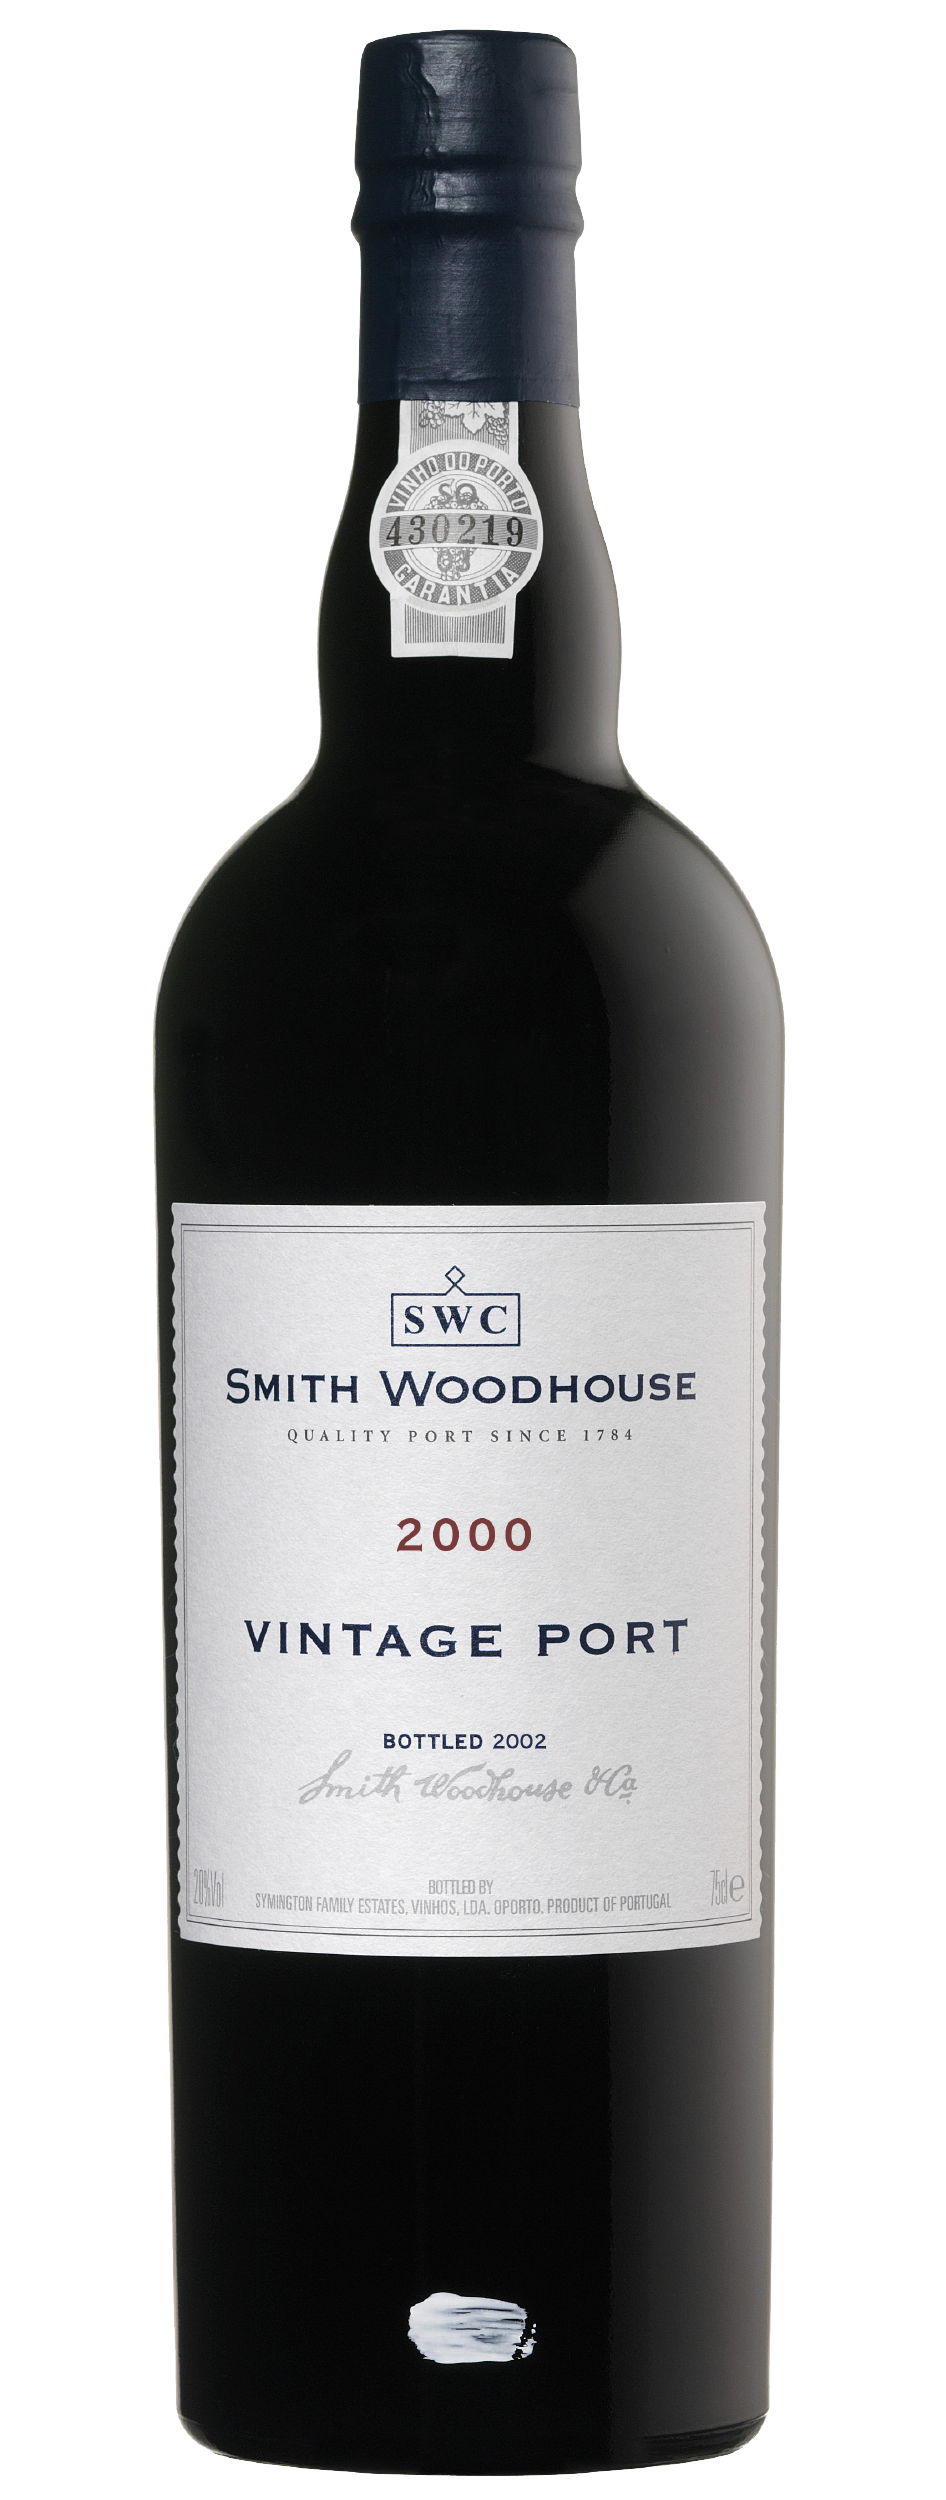 Product Image for SMITH WOODHOUSE VINTAGE PORT 2000